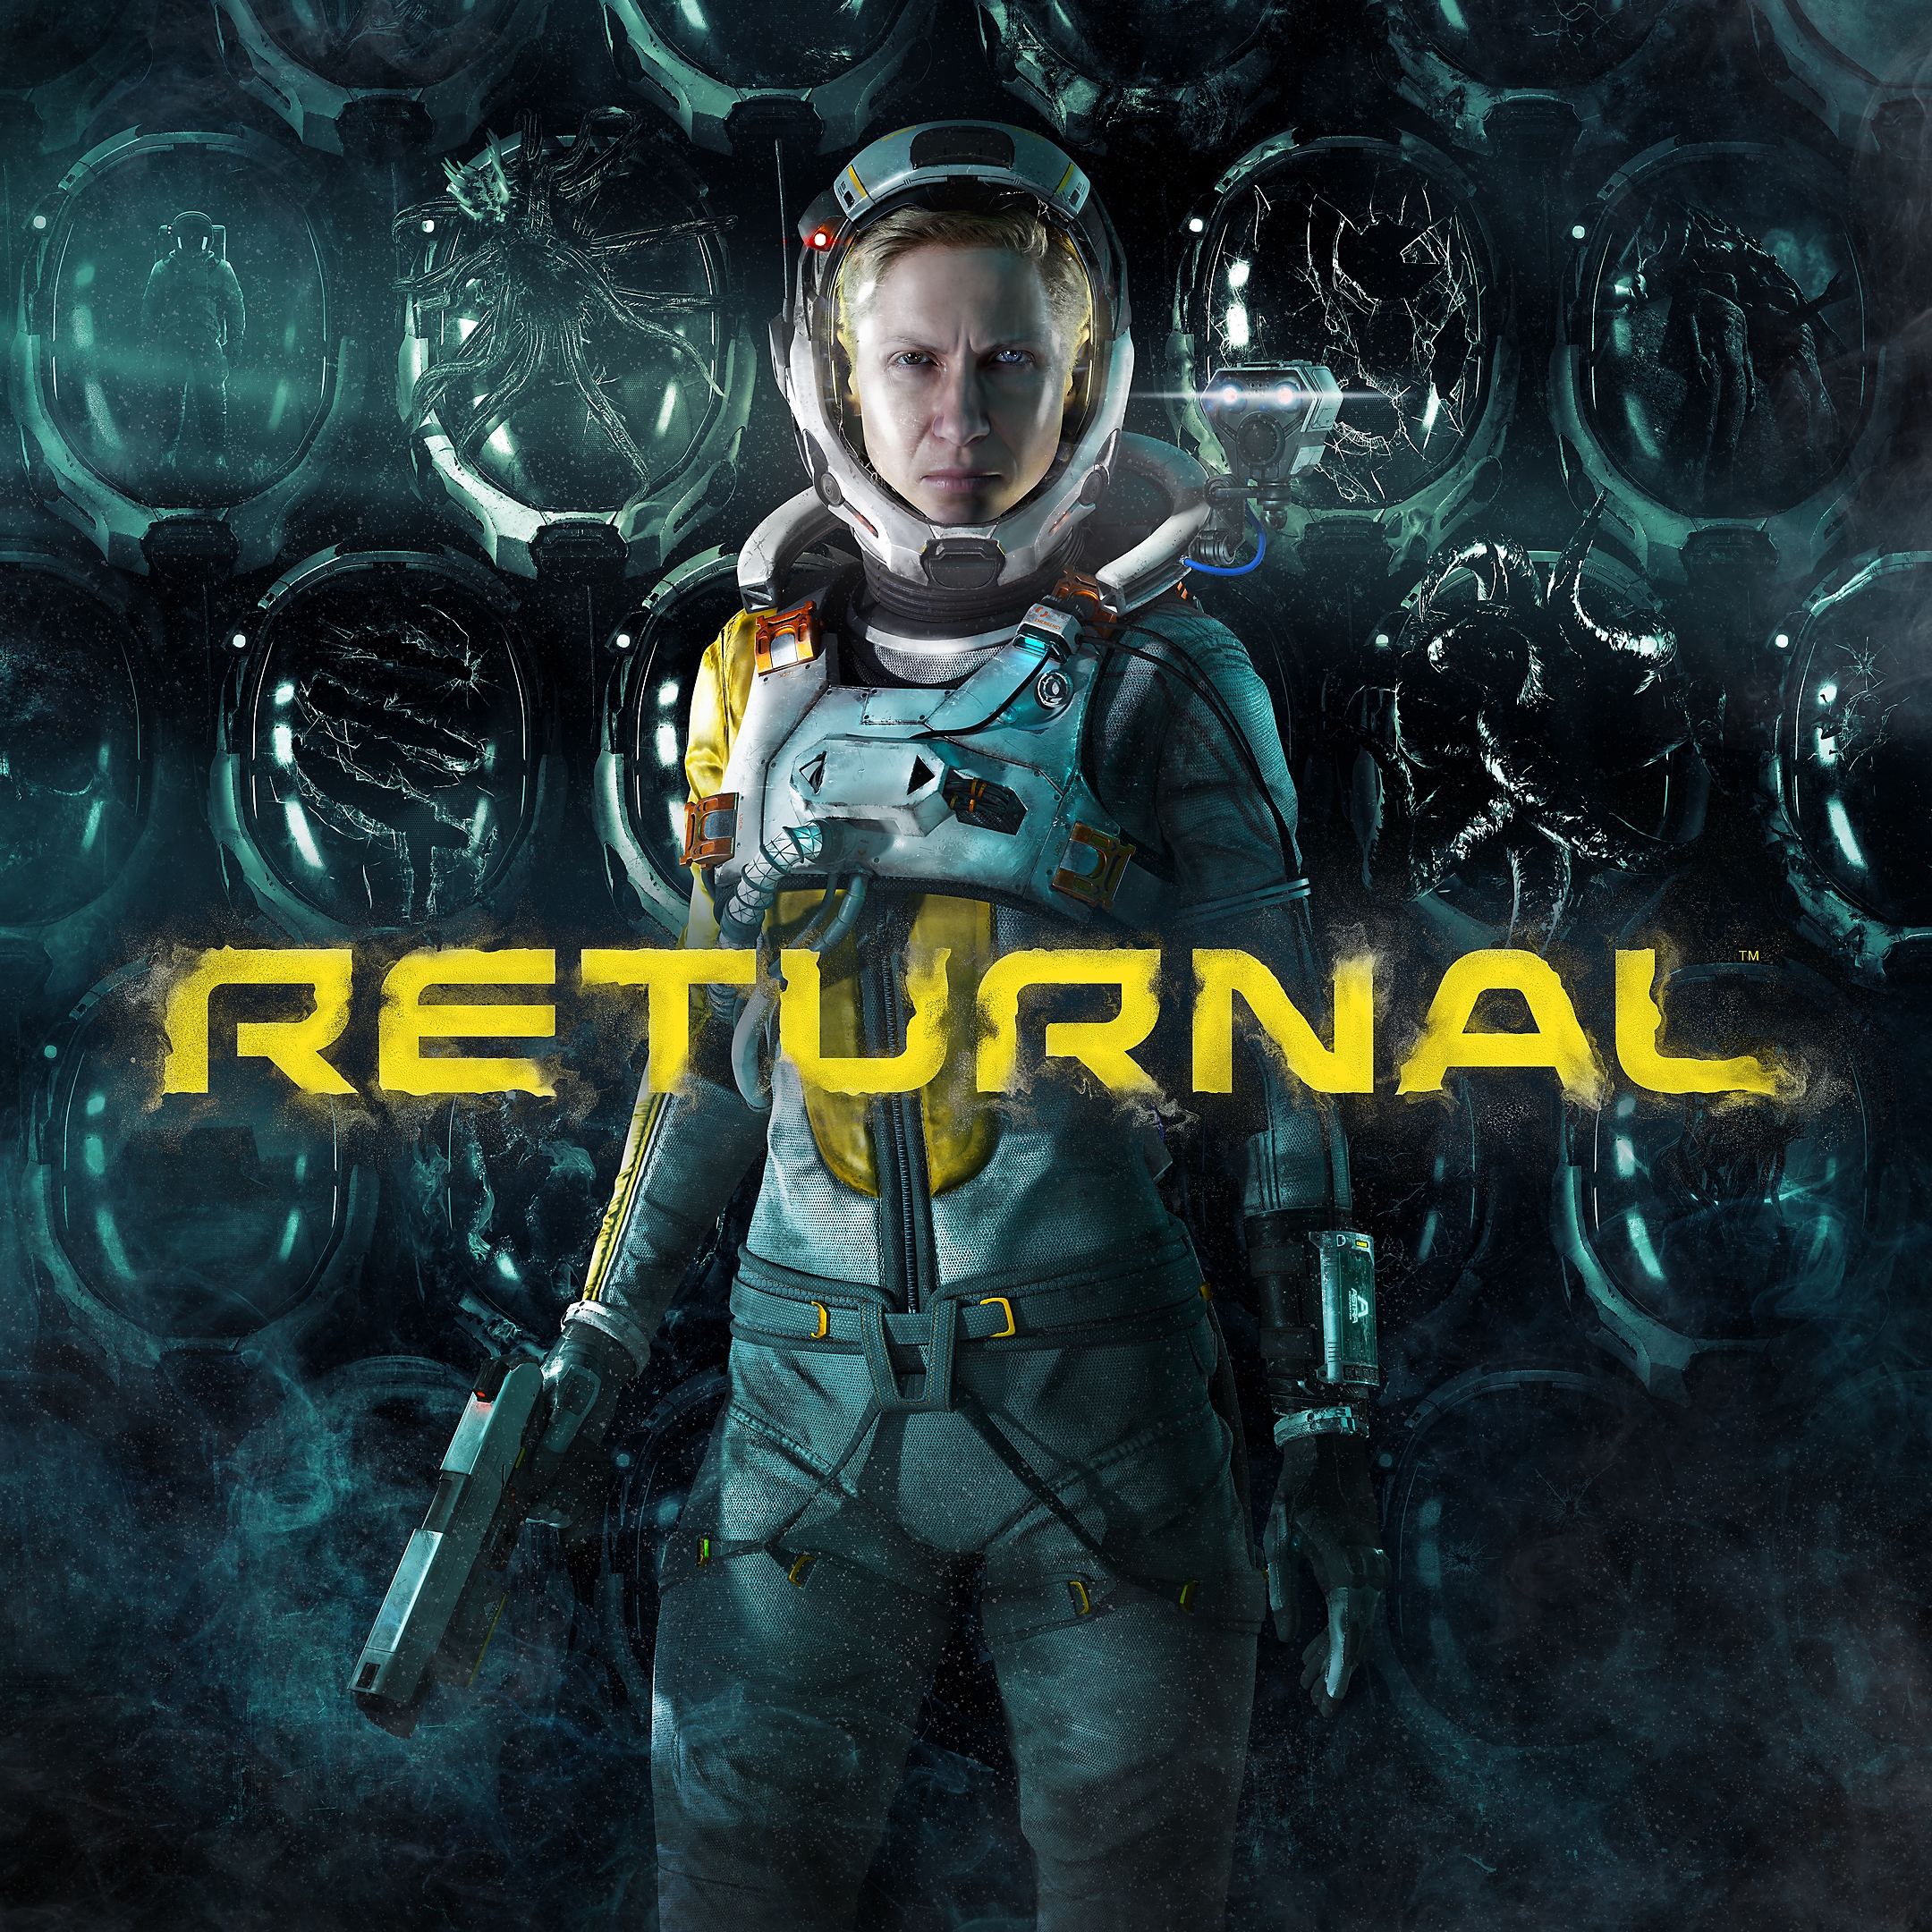 Returnal key art showing character face on